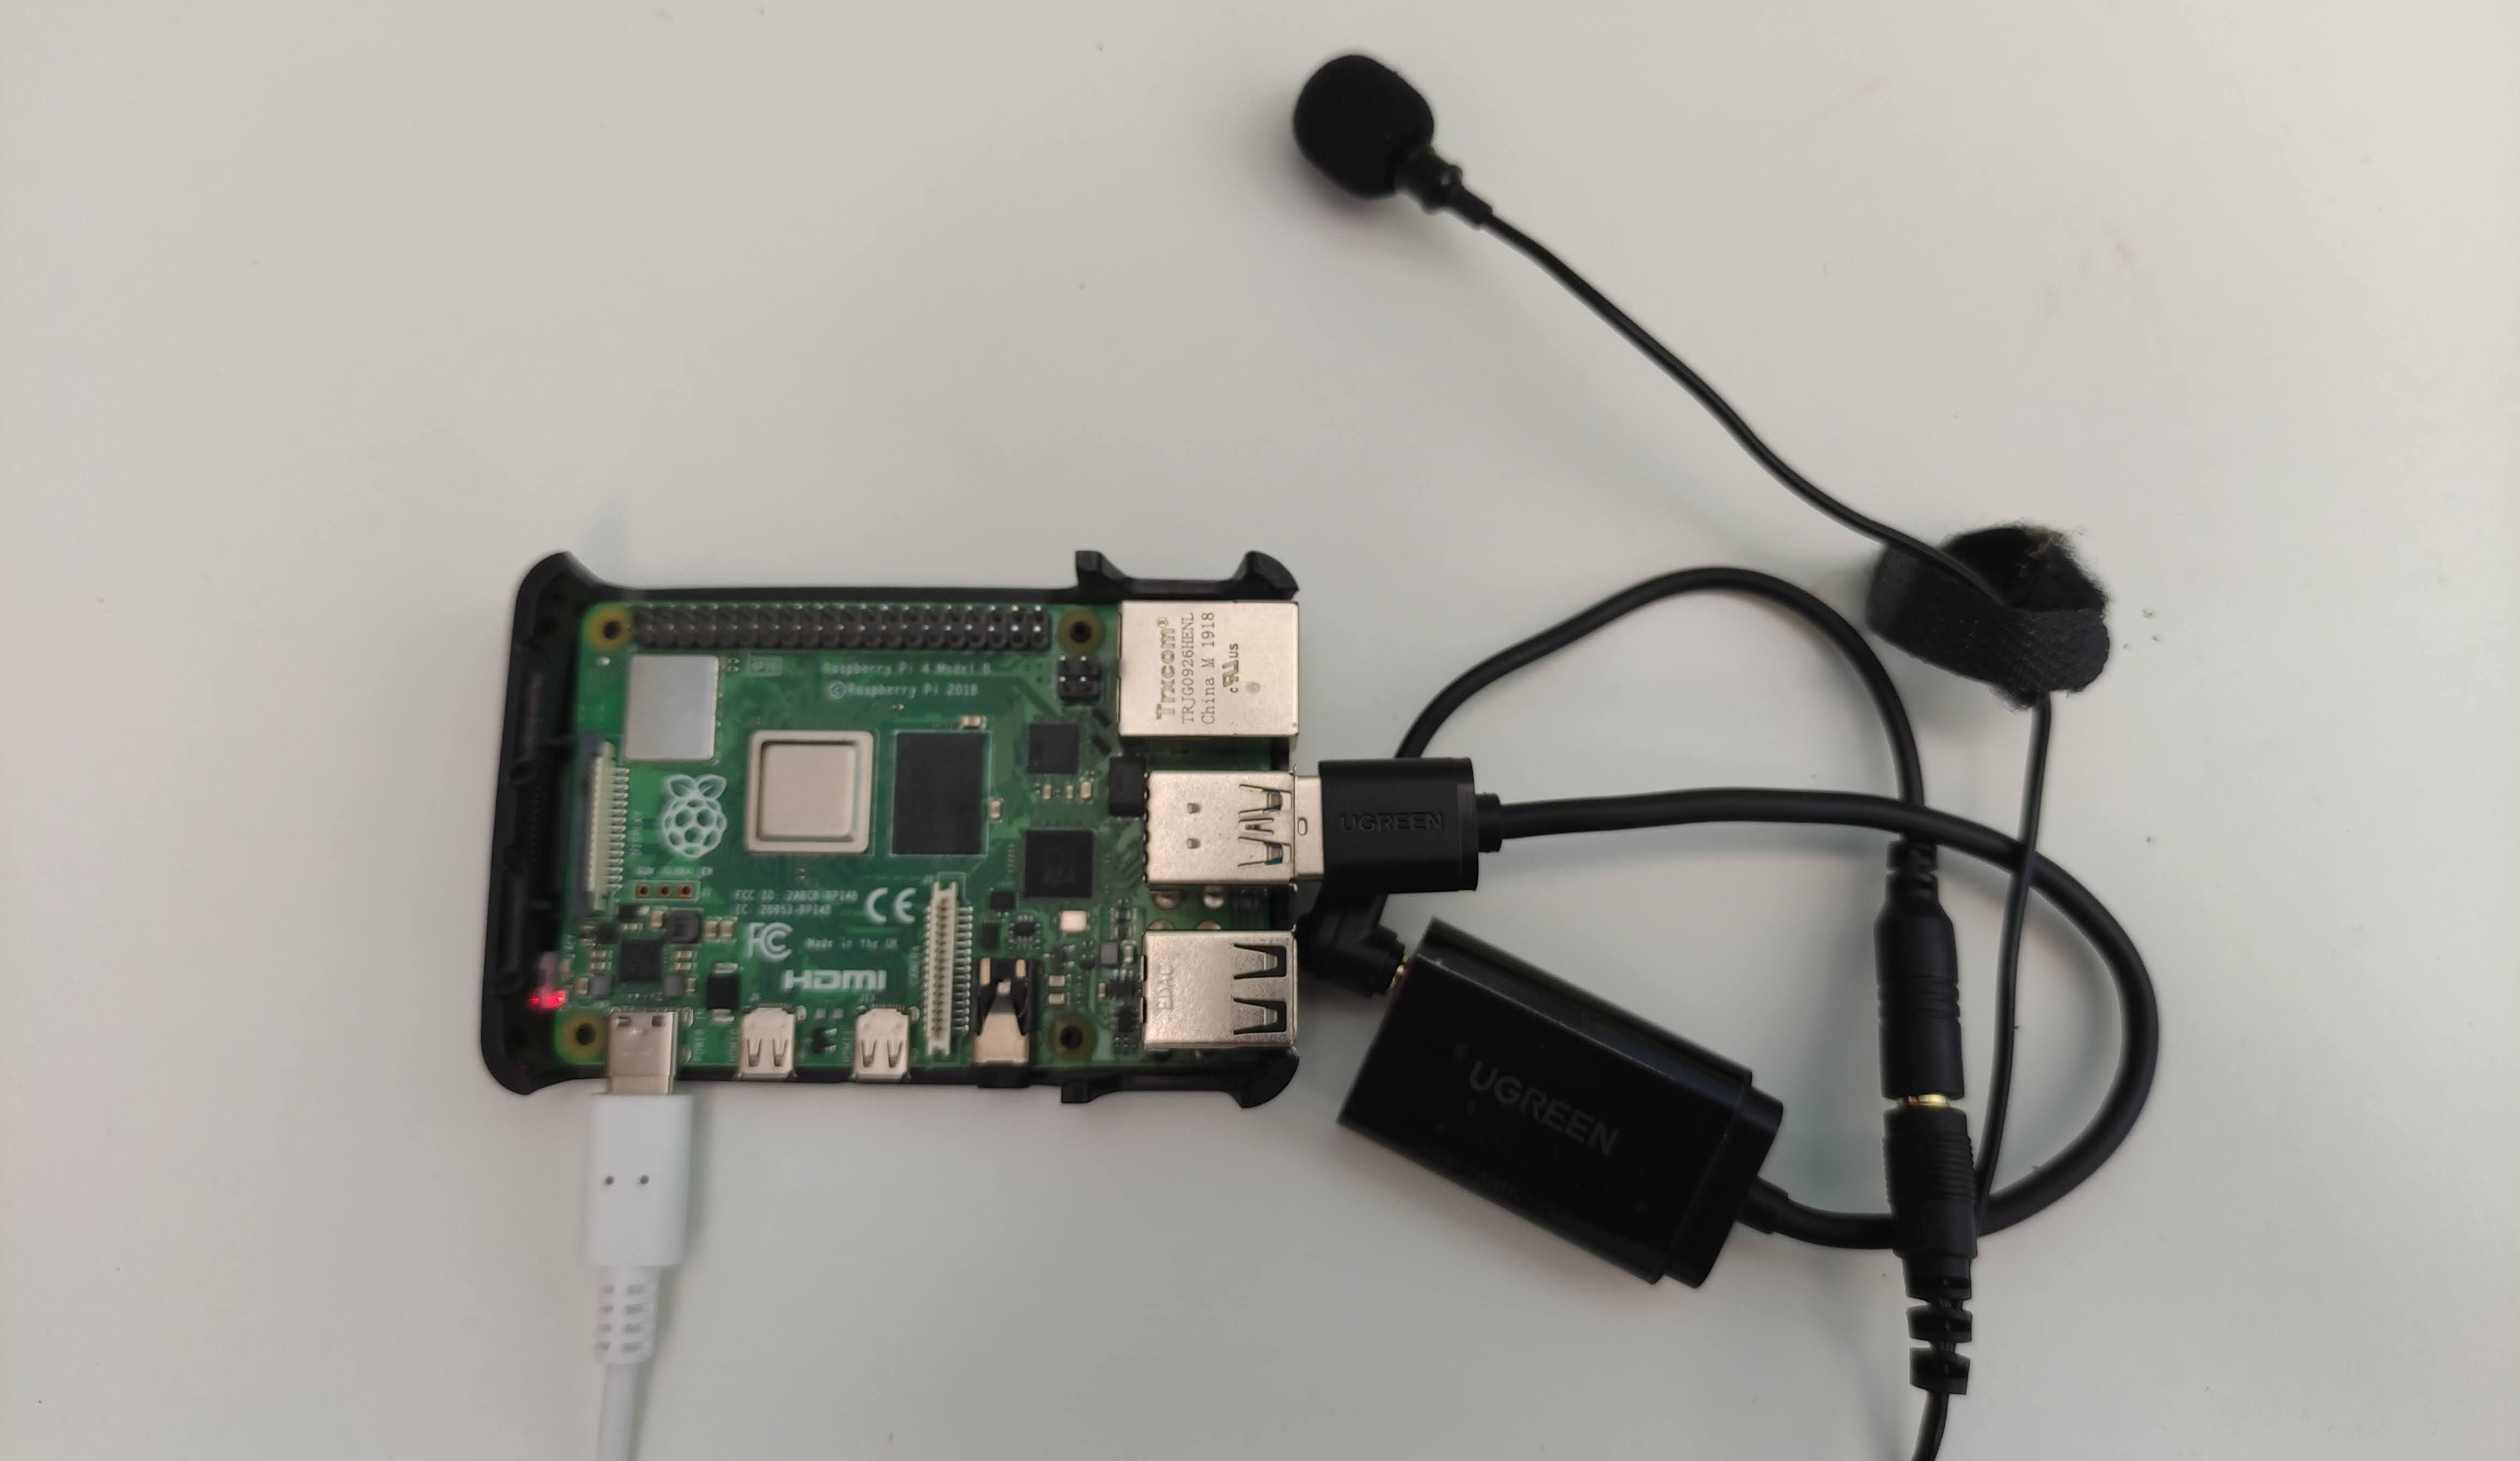 Raspberry Pi 4 with USB sound card adapter and lavalier microphone